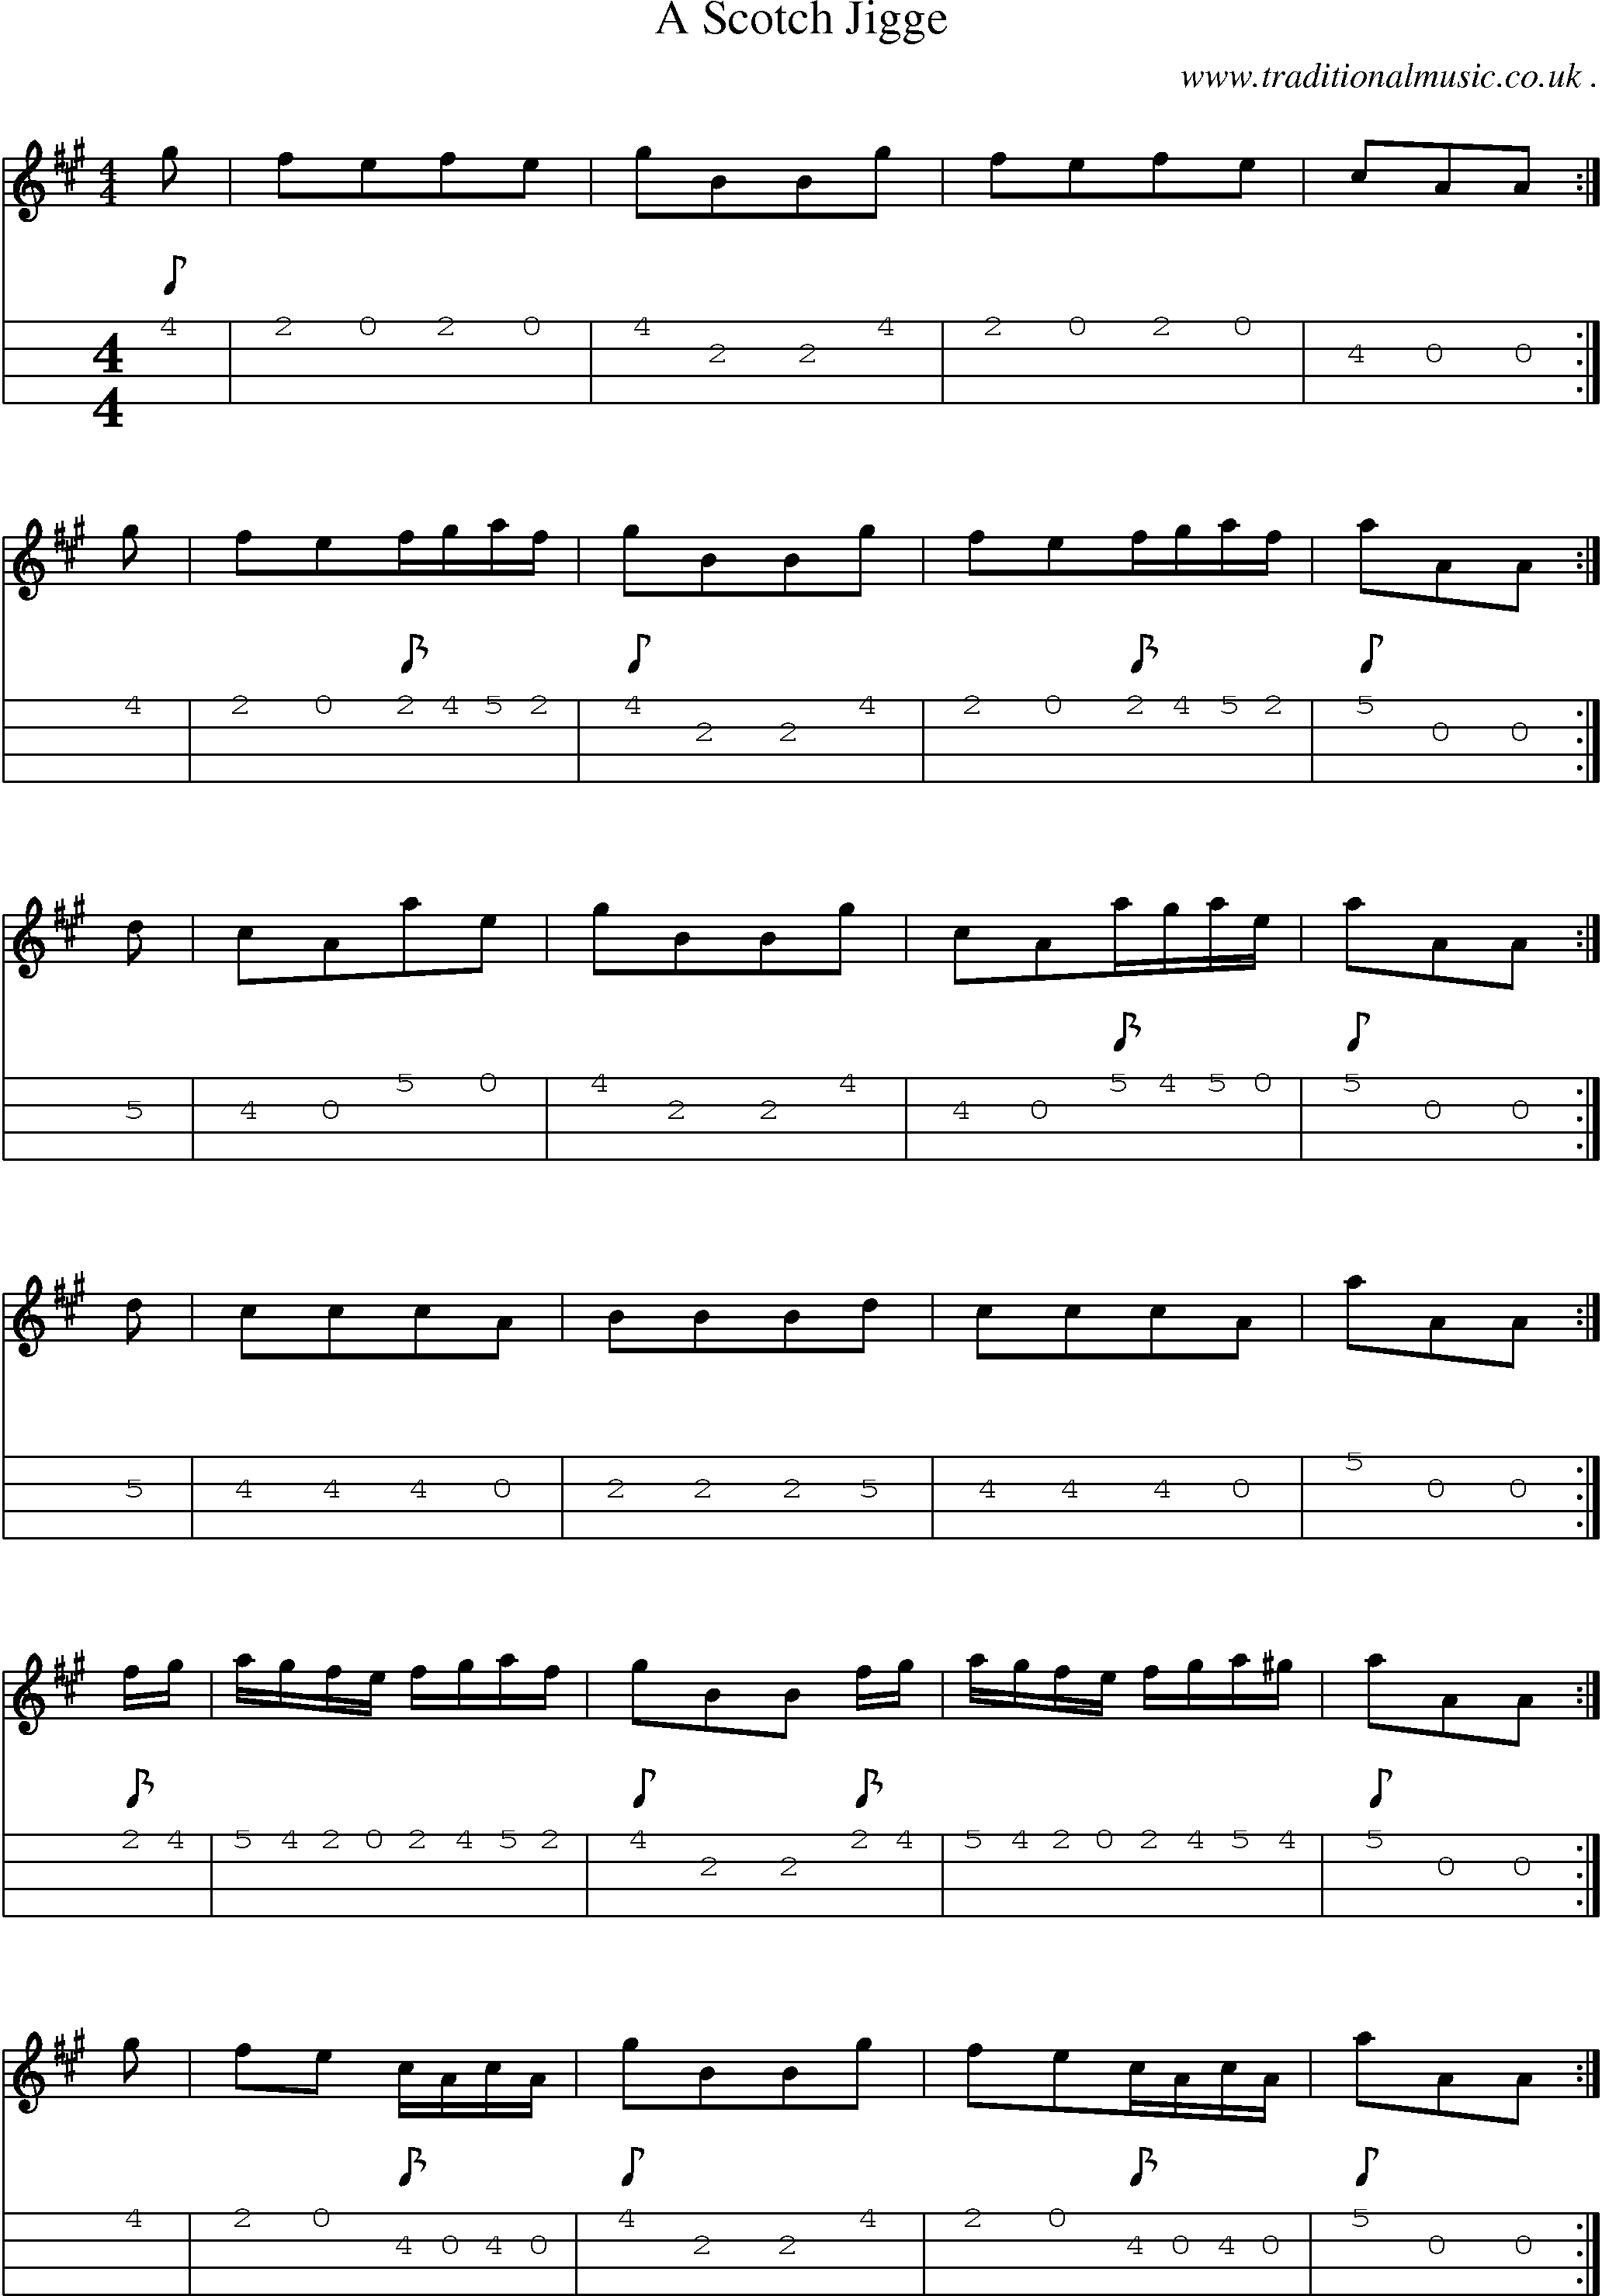 Sheet-music  score, Chords and Mandolin Tabs for A Scotch Jigge